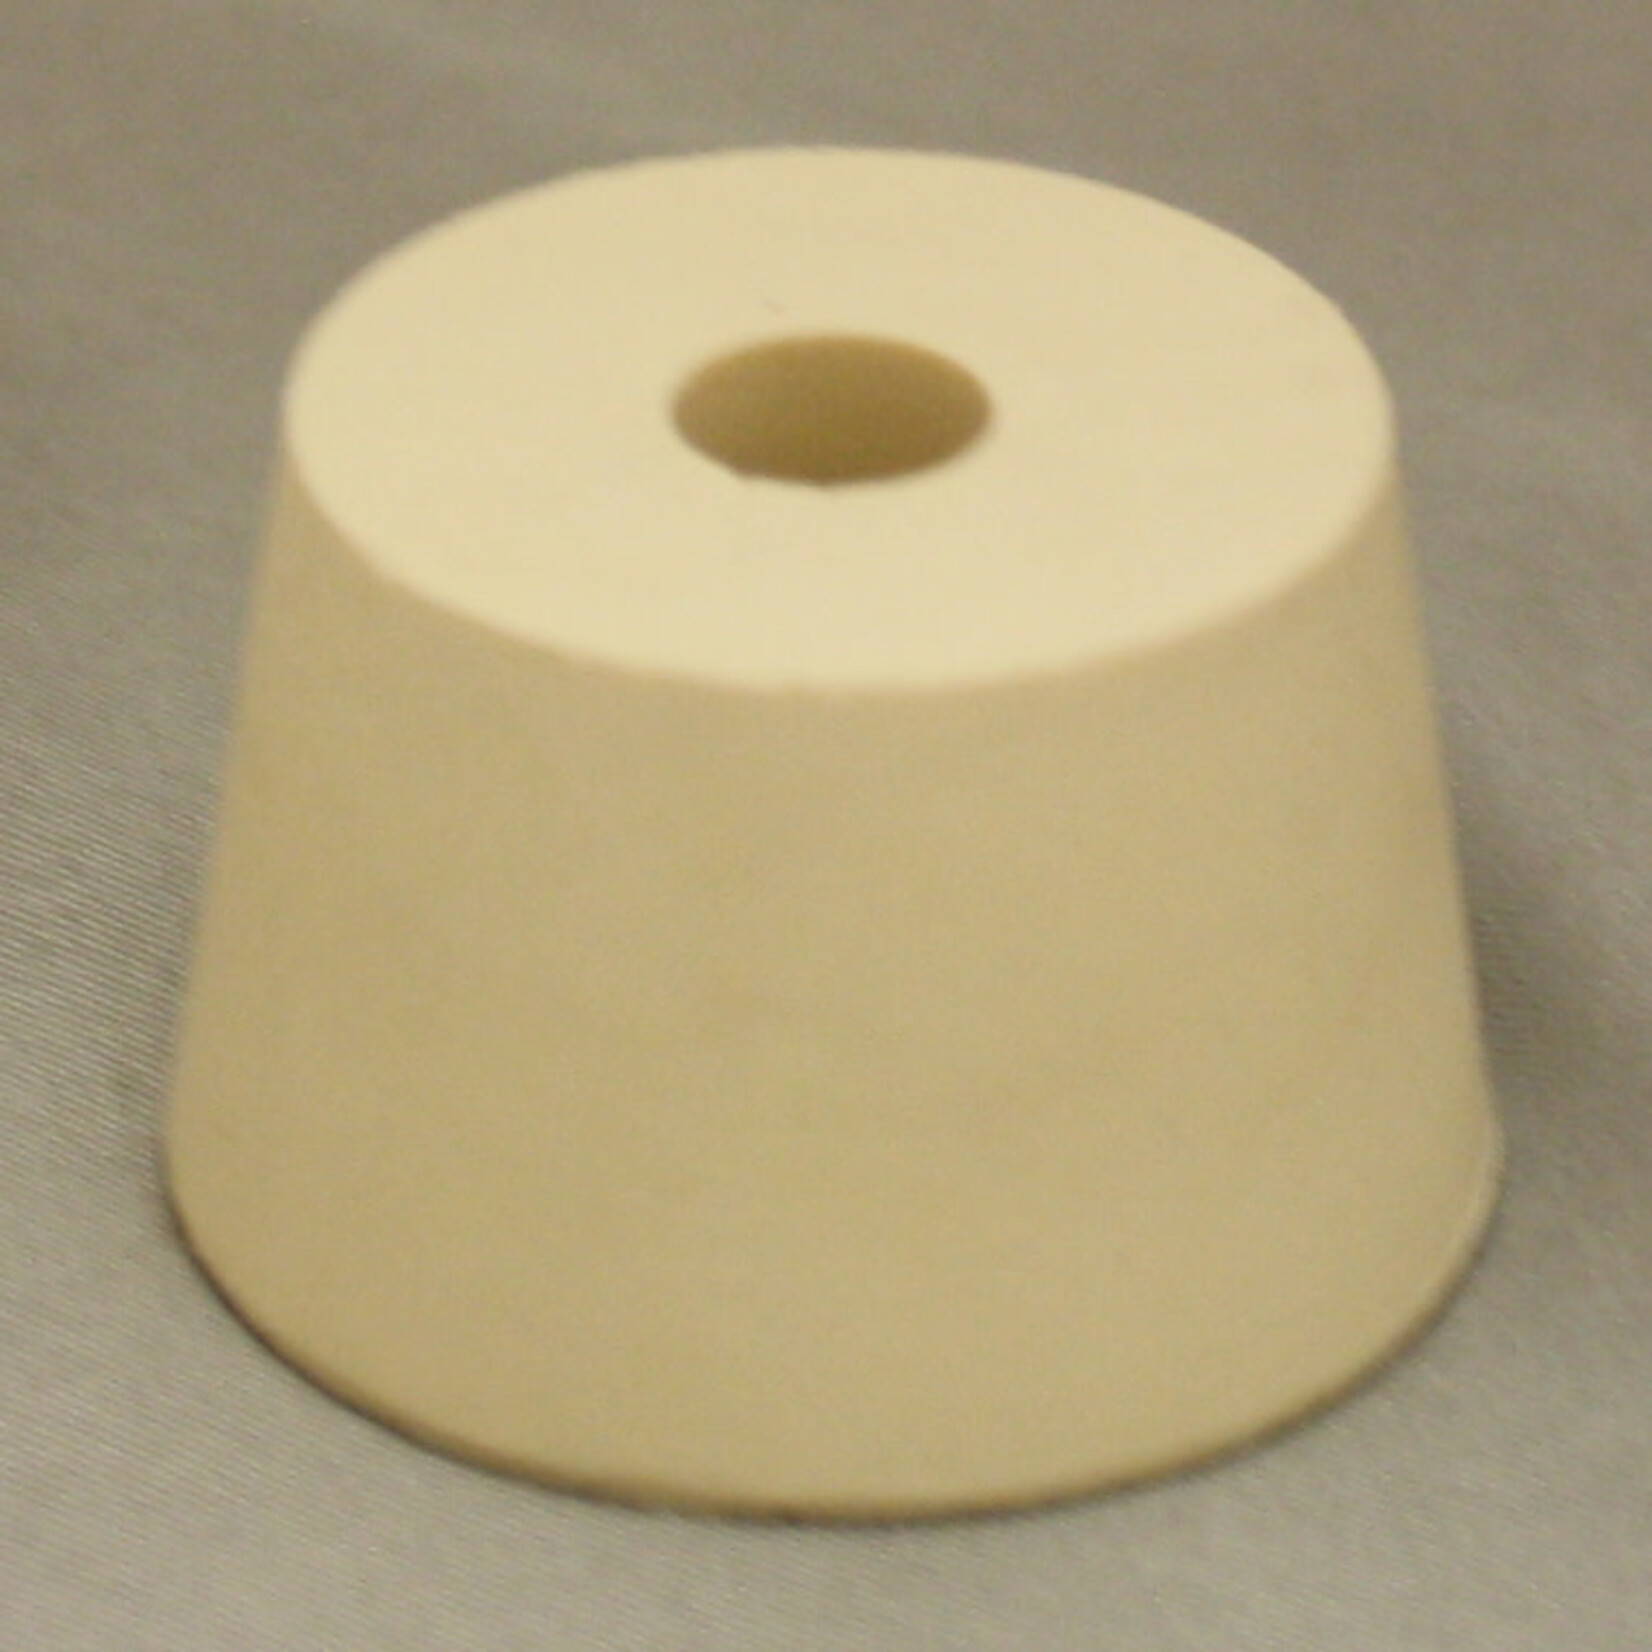 #7.5 Drilled Stopper